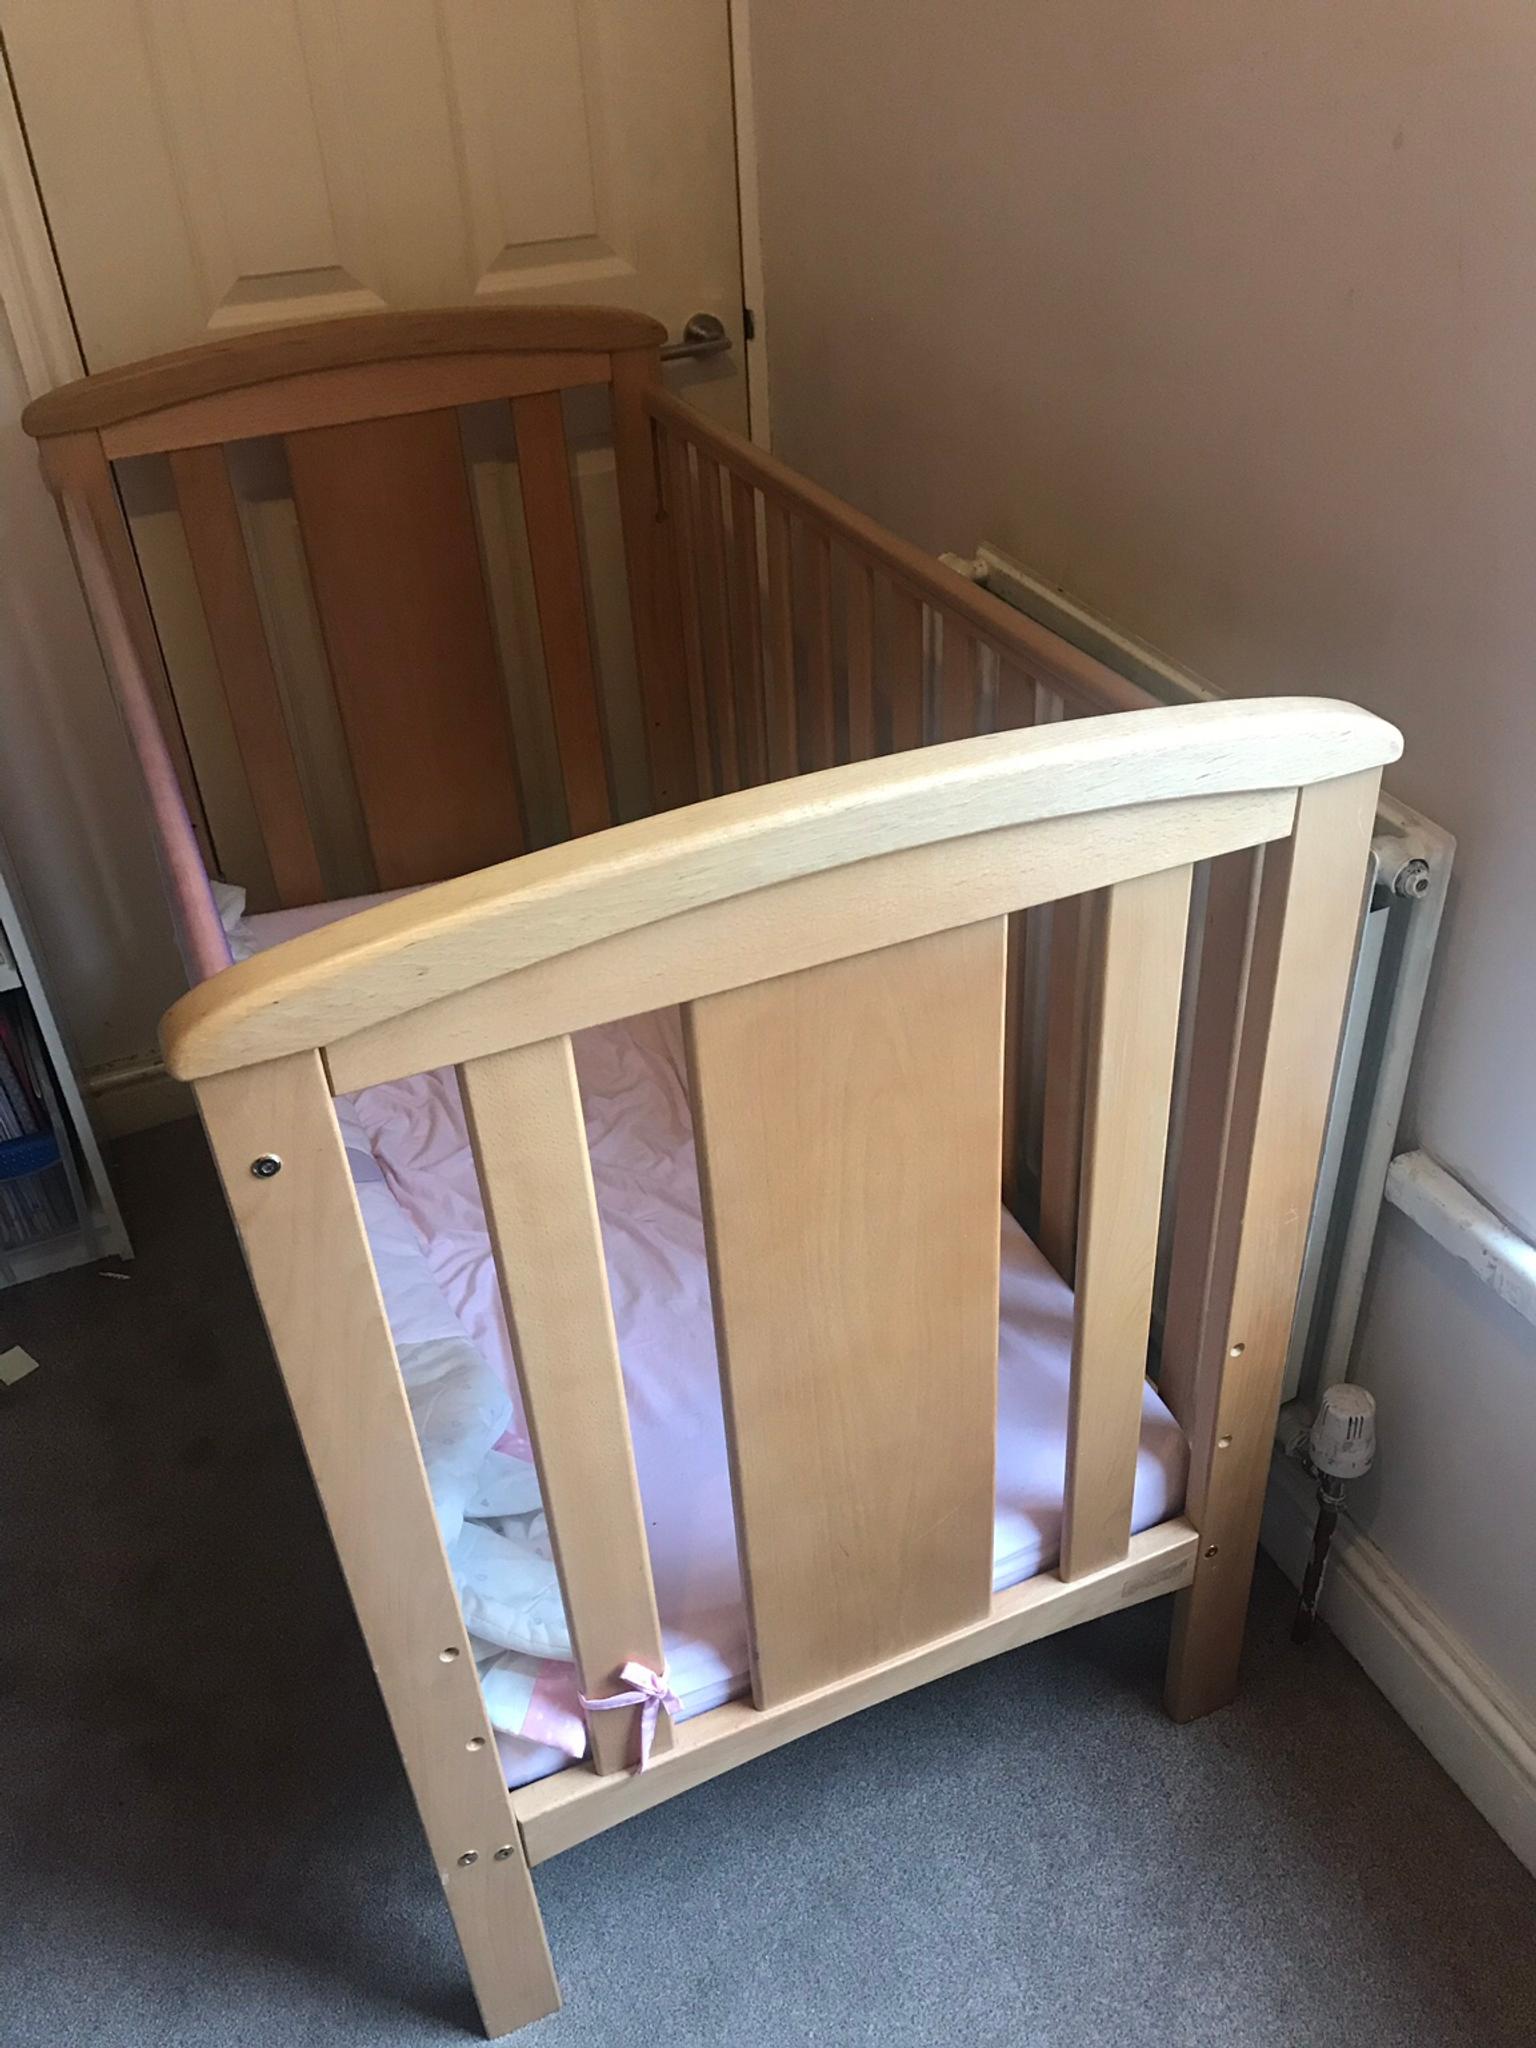 cot teething rail protector mothercare